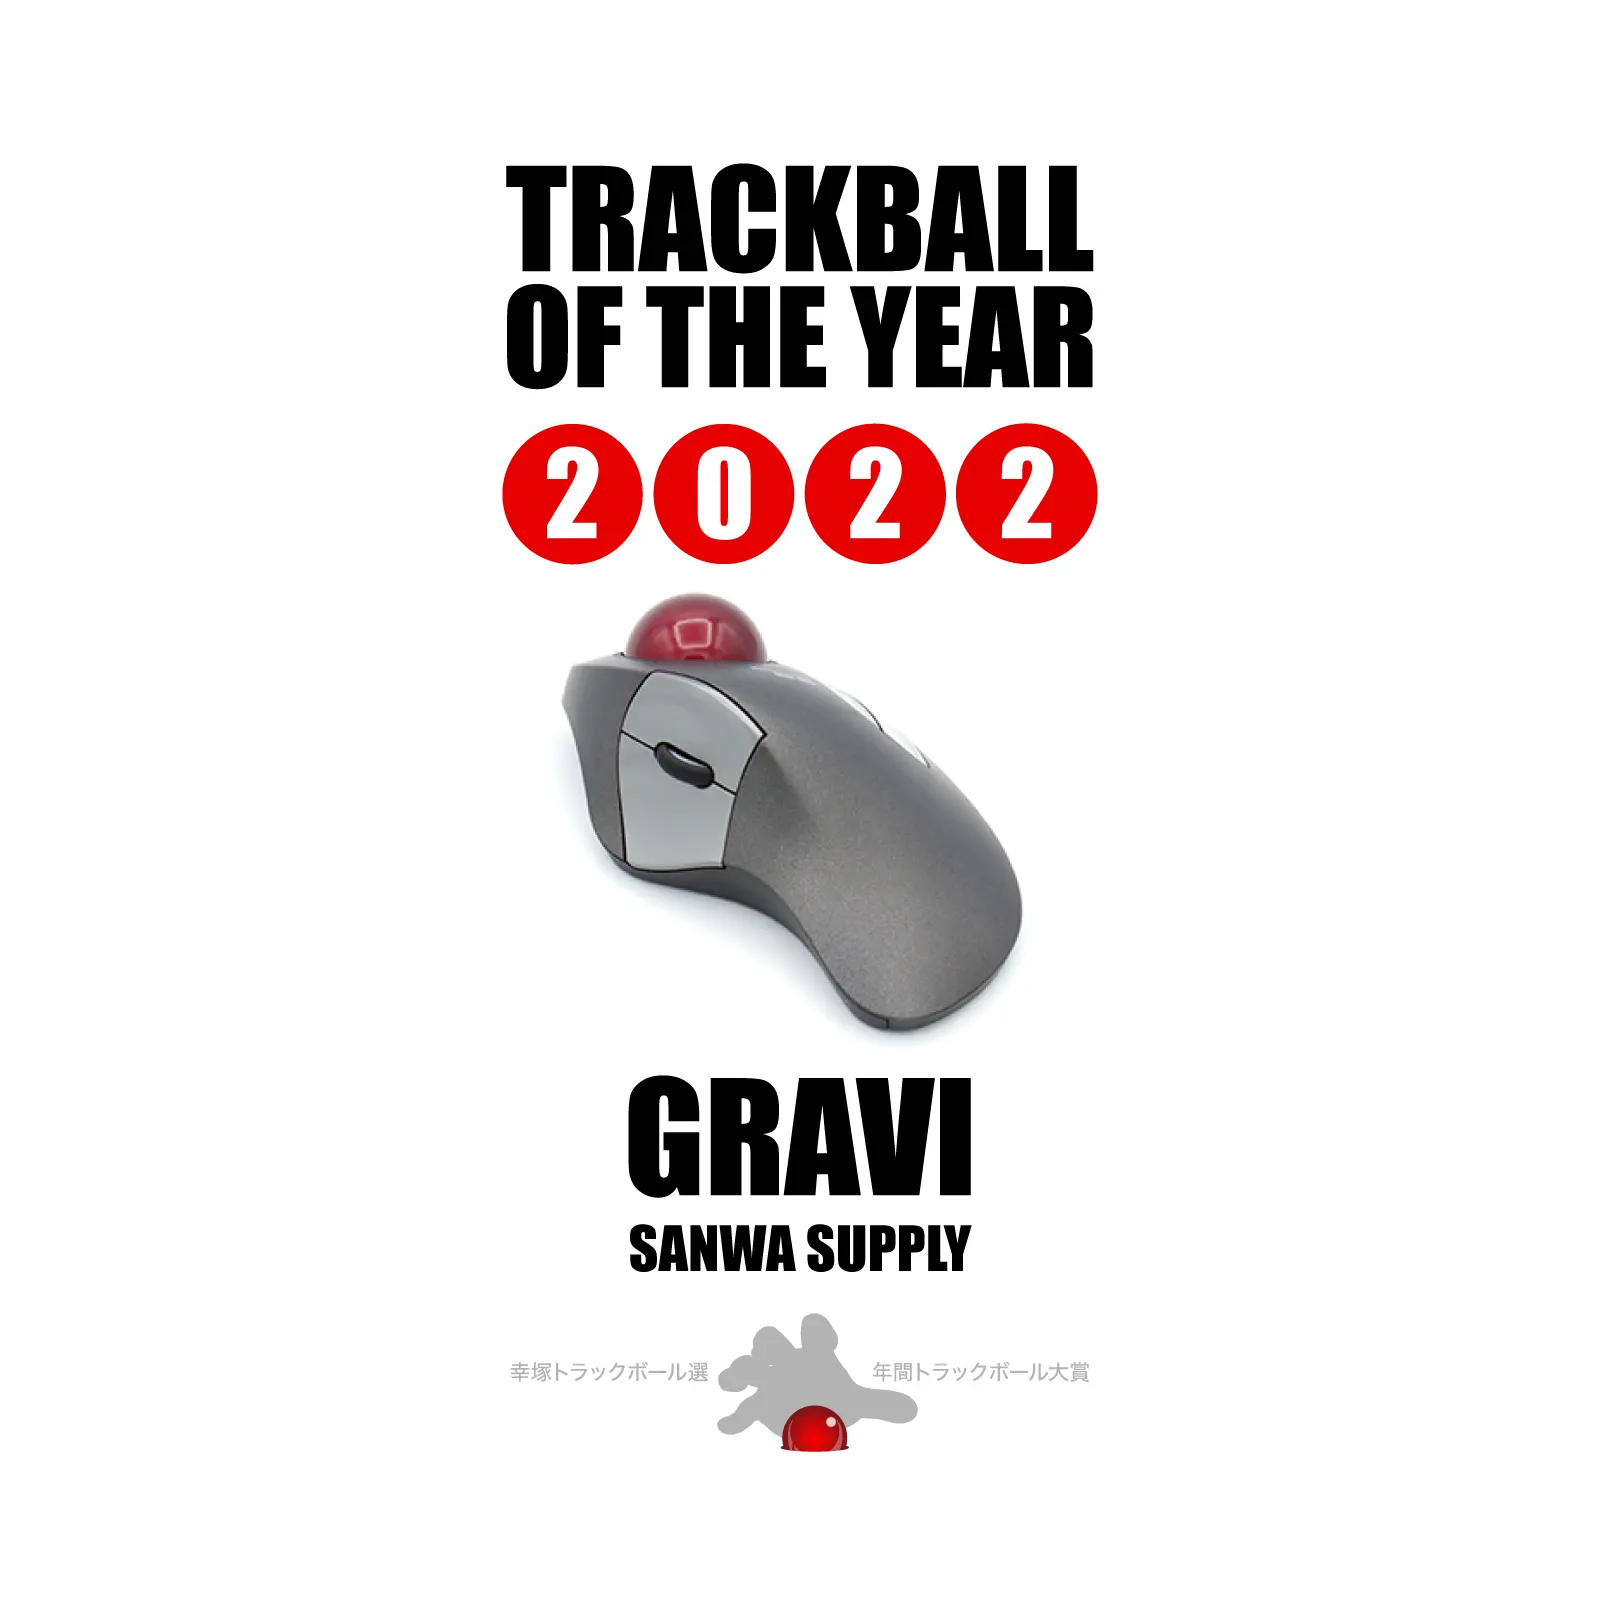 Trackball of the Year 2021